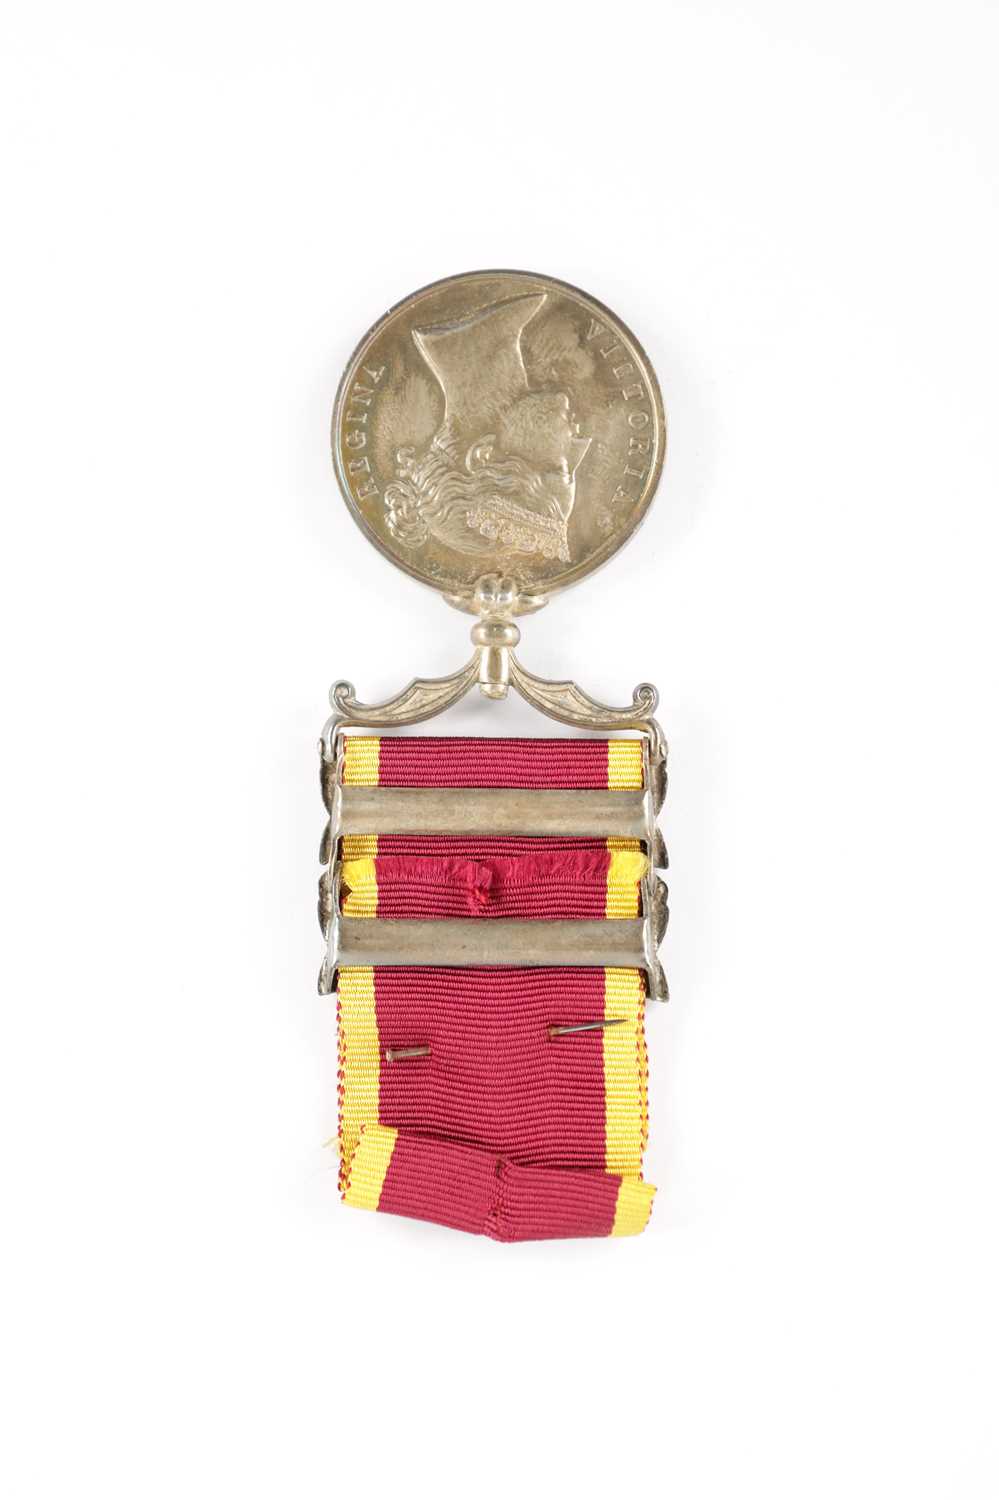 SECOND CHINA WAR MEDAL WITH TWO CLASPS - Image 4 of 6